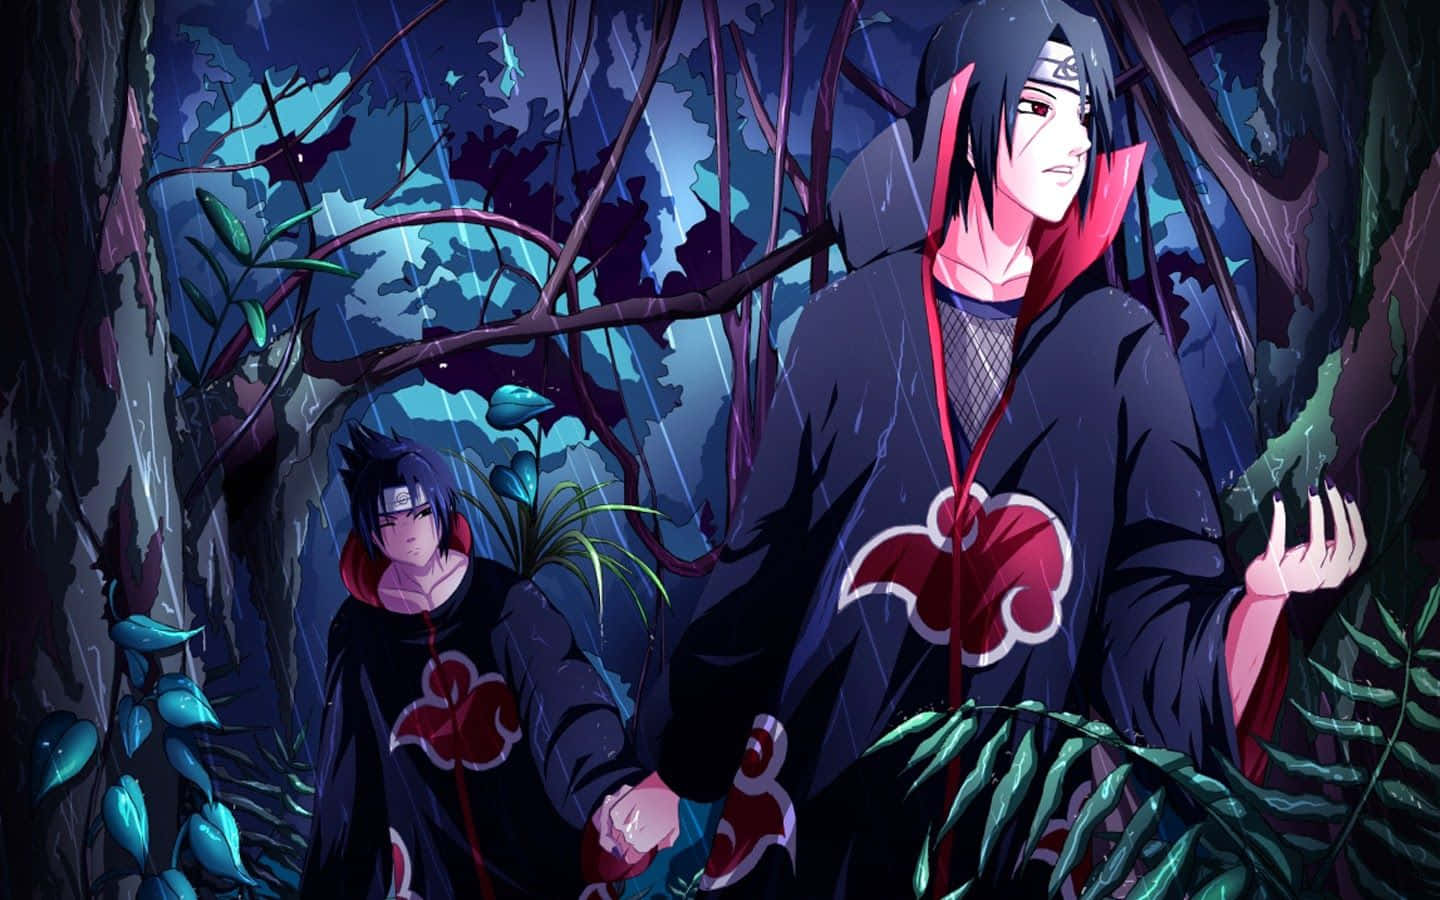 The Enigmatic Itachi Uchiha in Action